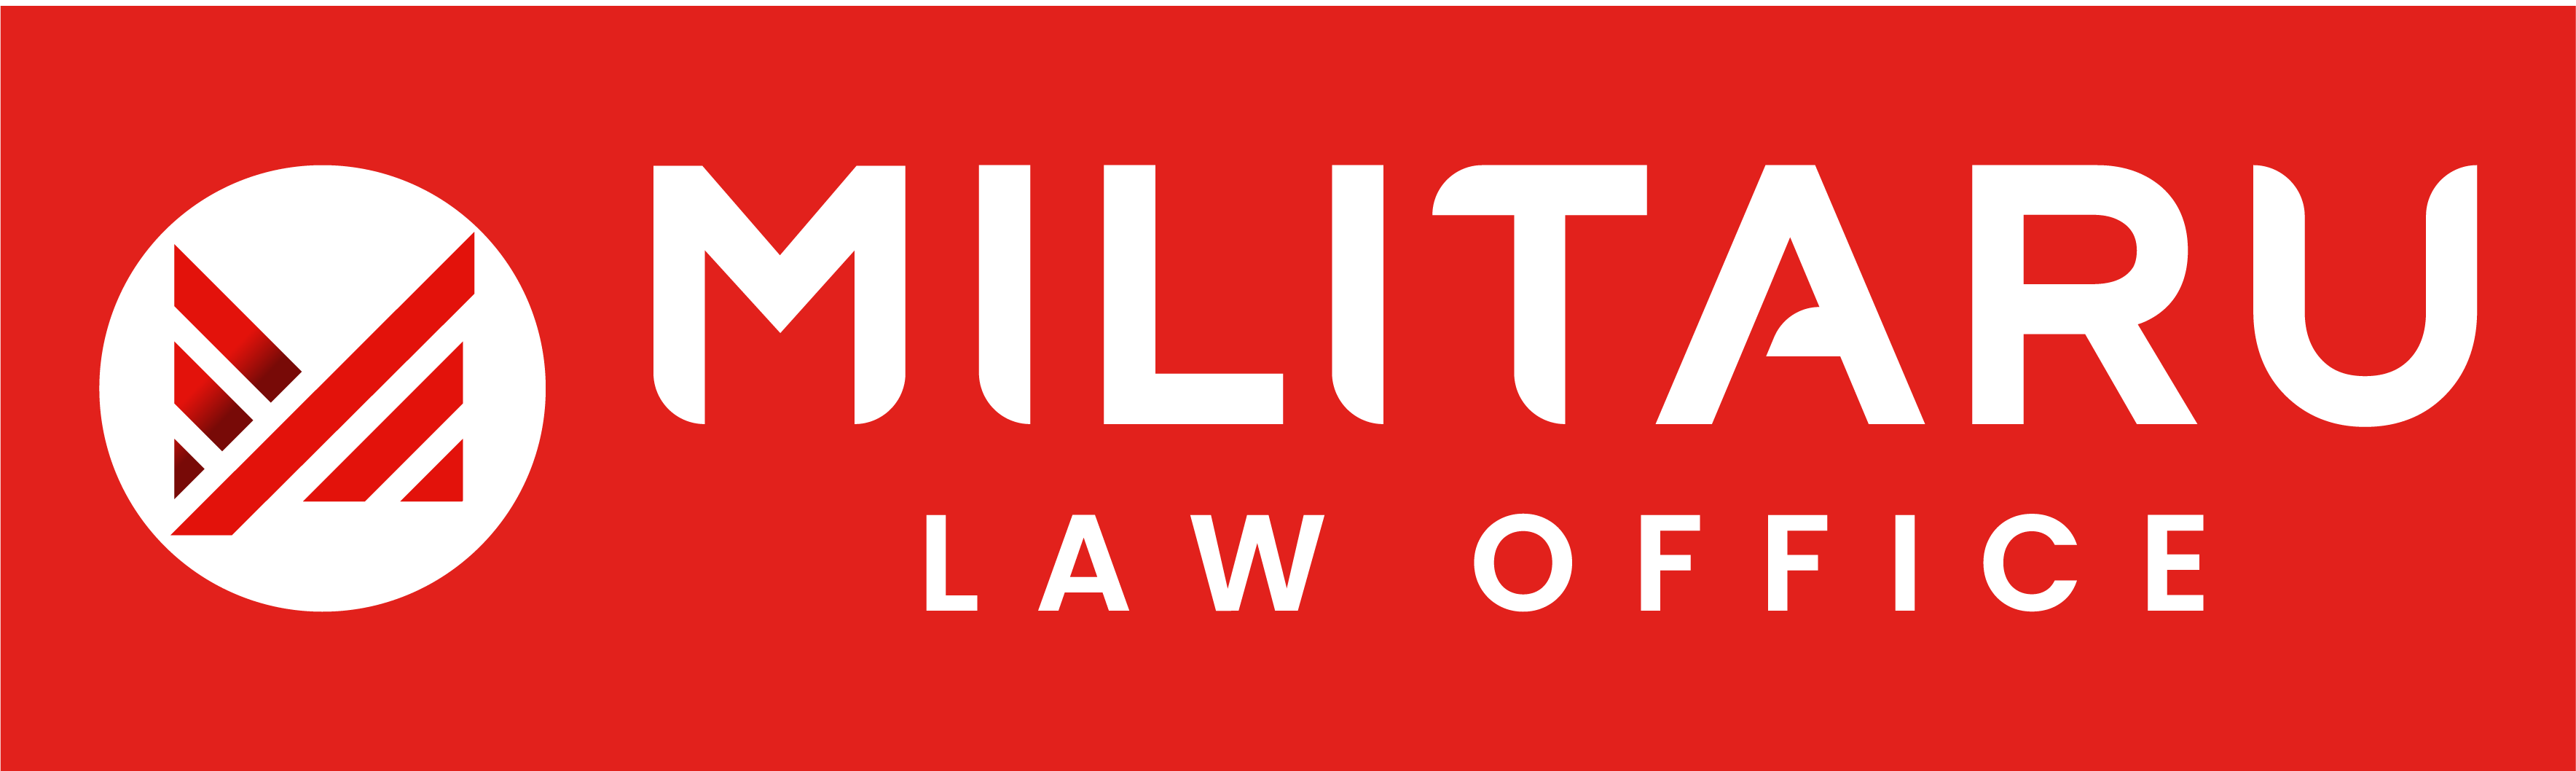 Militaru Law Office | One team. One mission